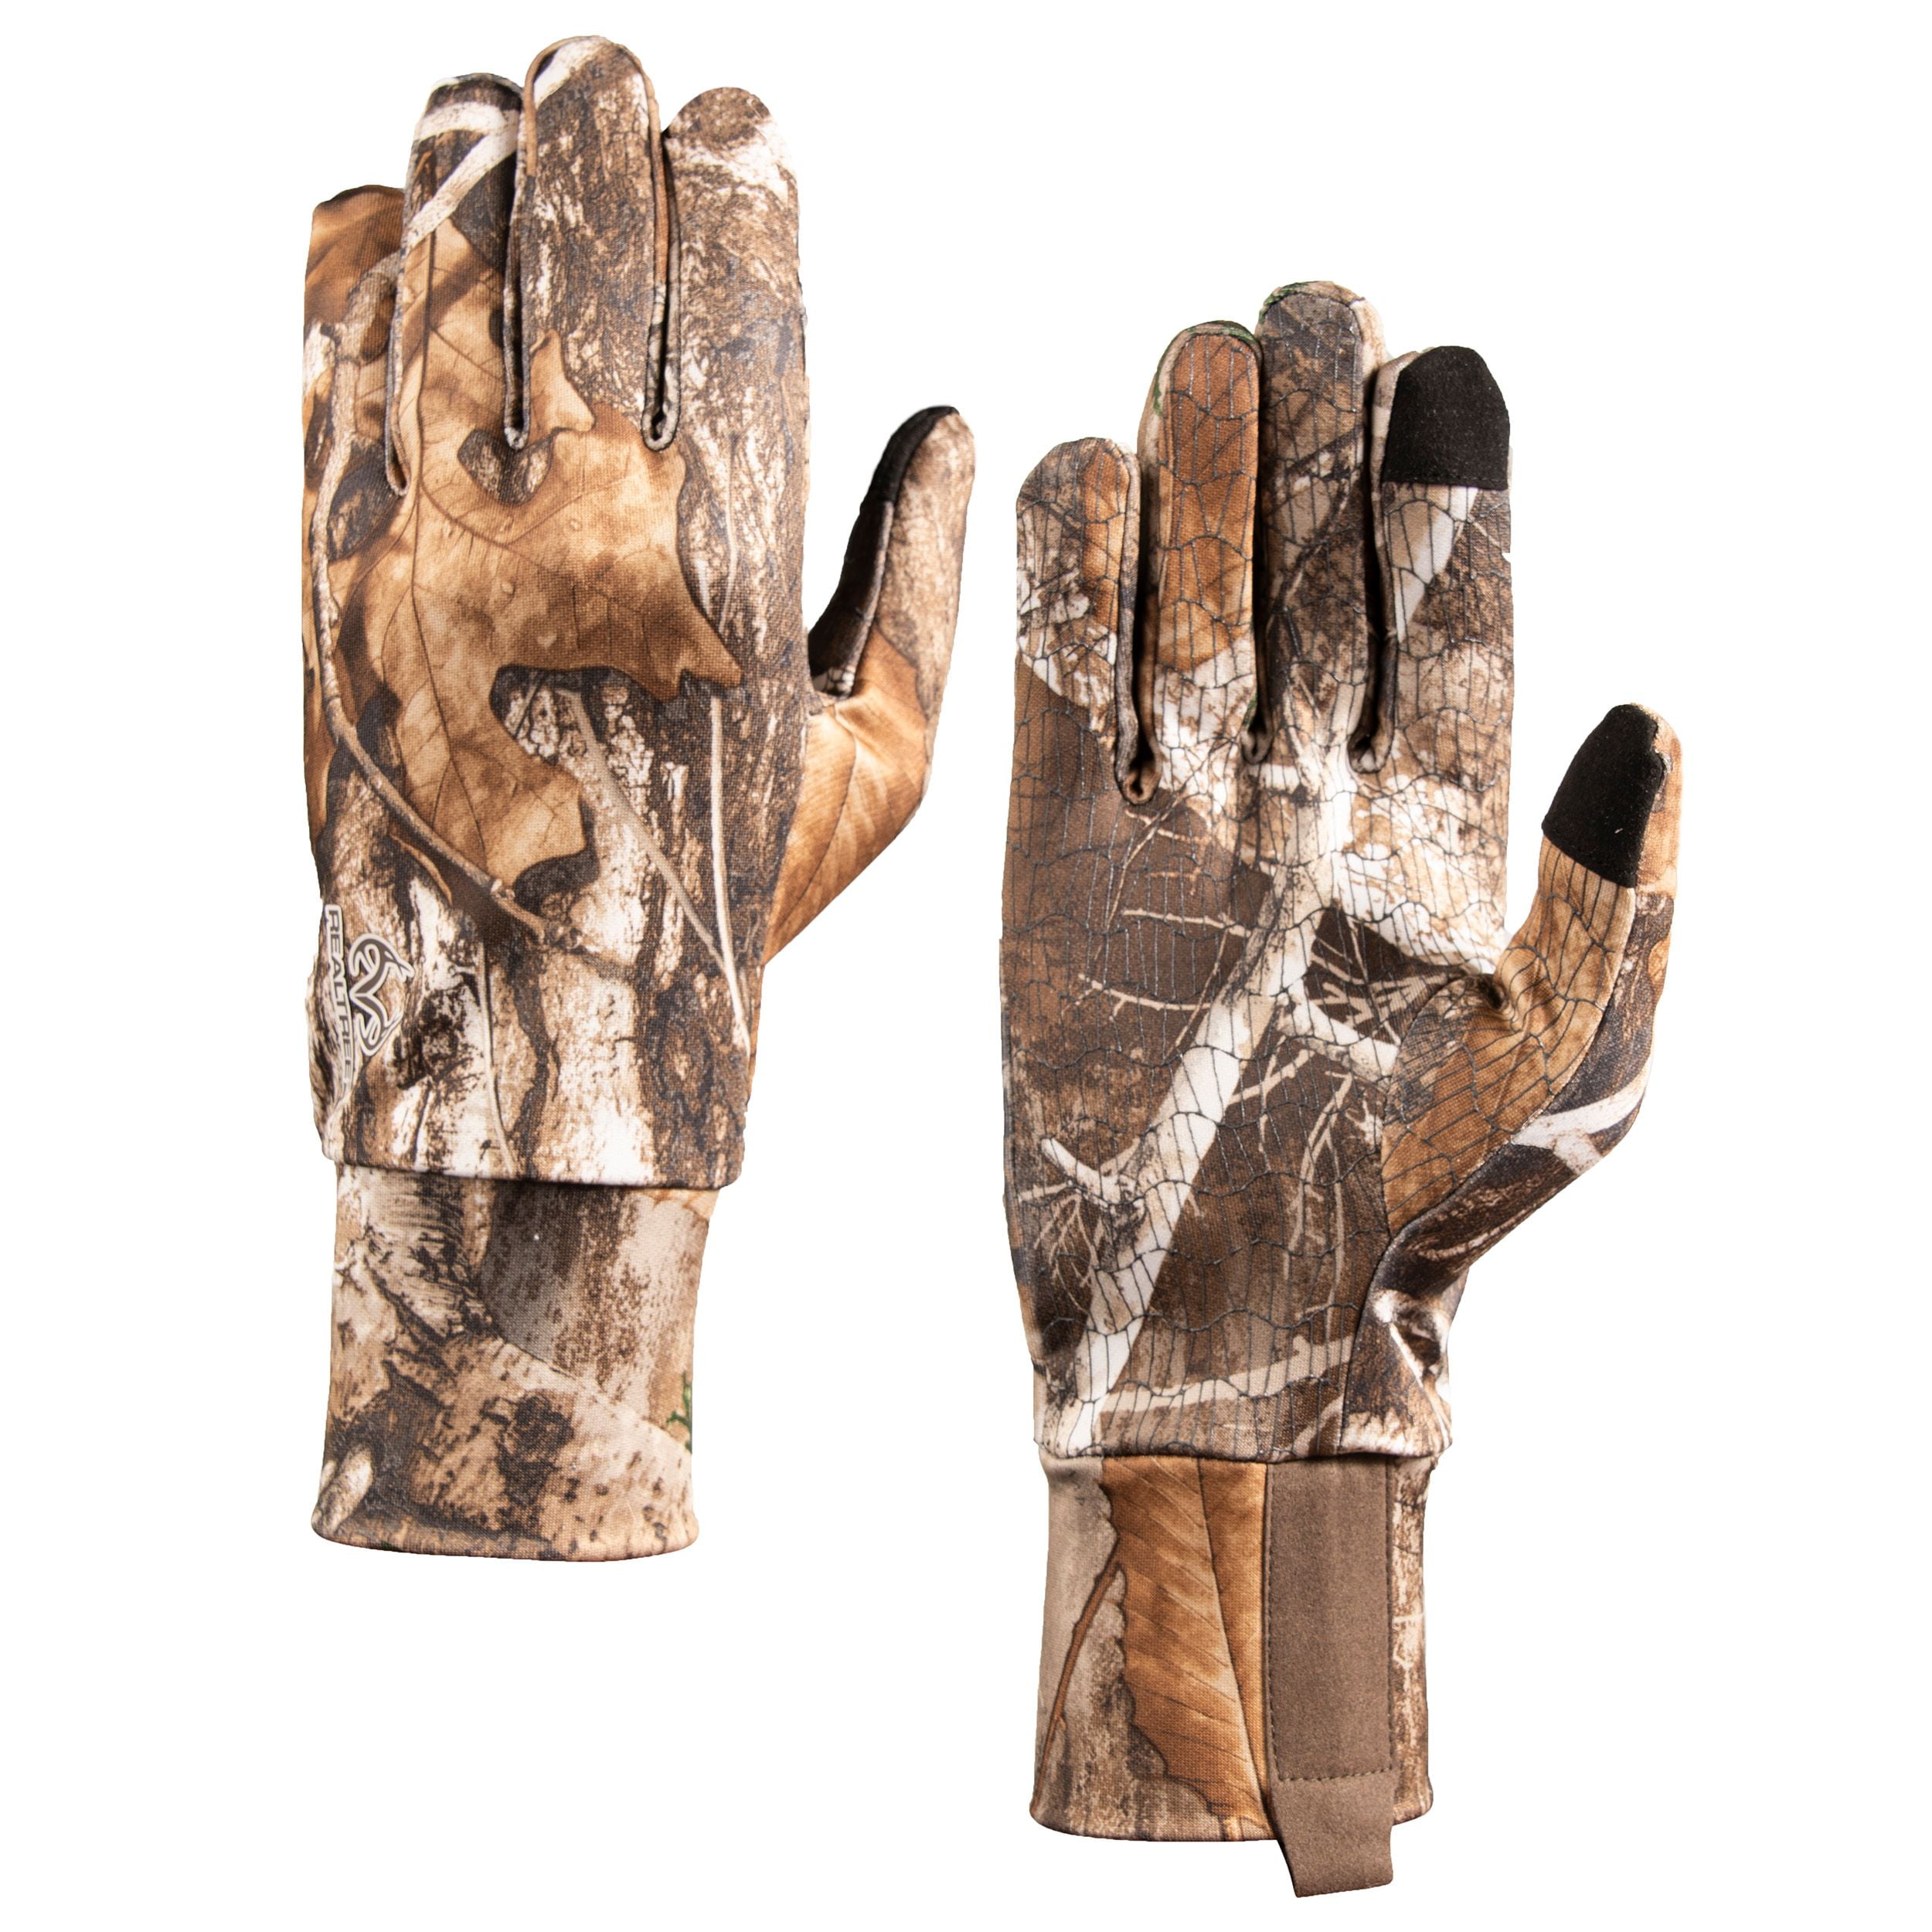 ADVANTAGE TIMBER ADT CAMOUFLAGE HUNTING SHOOTING JERSEY KNIT GLOVES realtree 